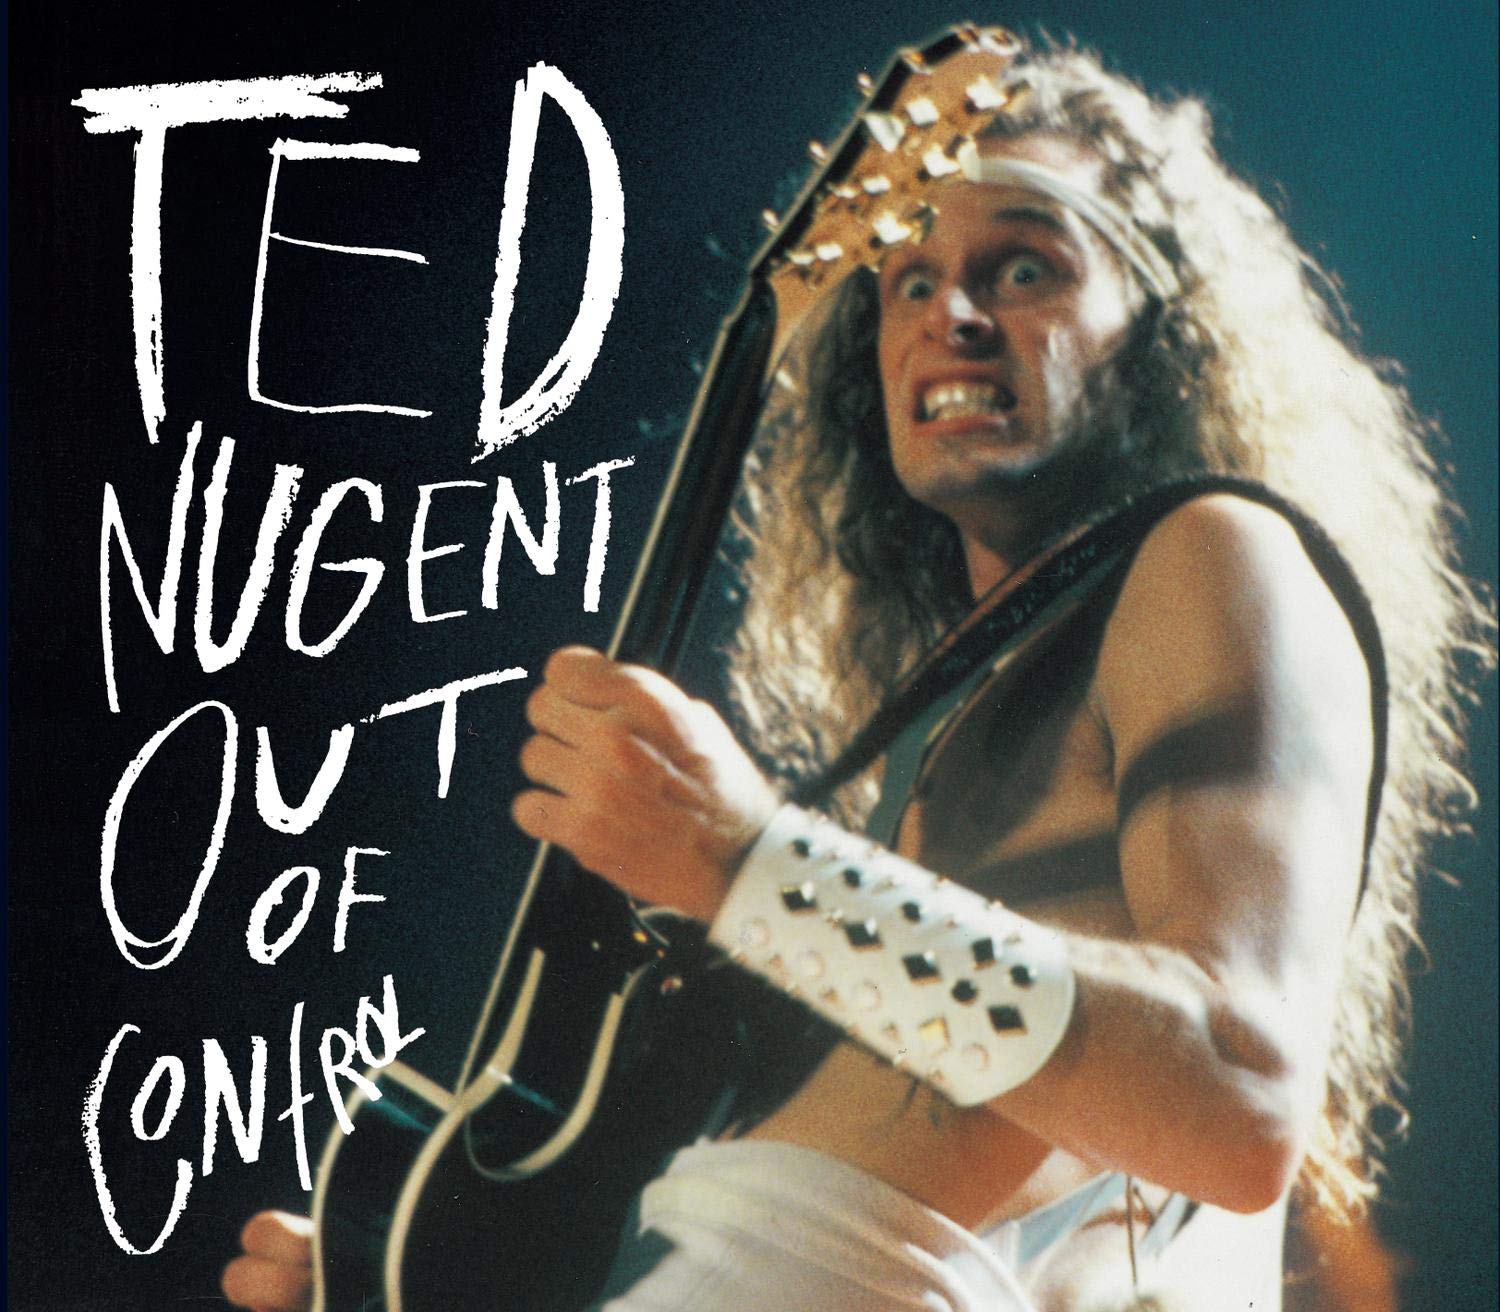 Art for Free-For-All by Ted Nugent